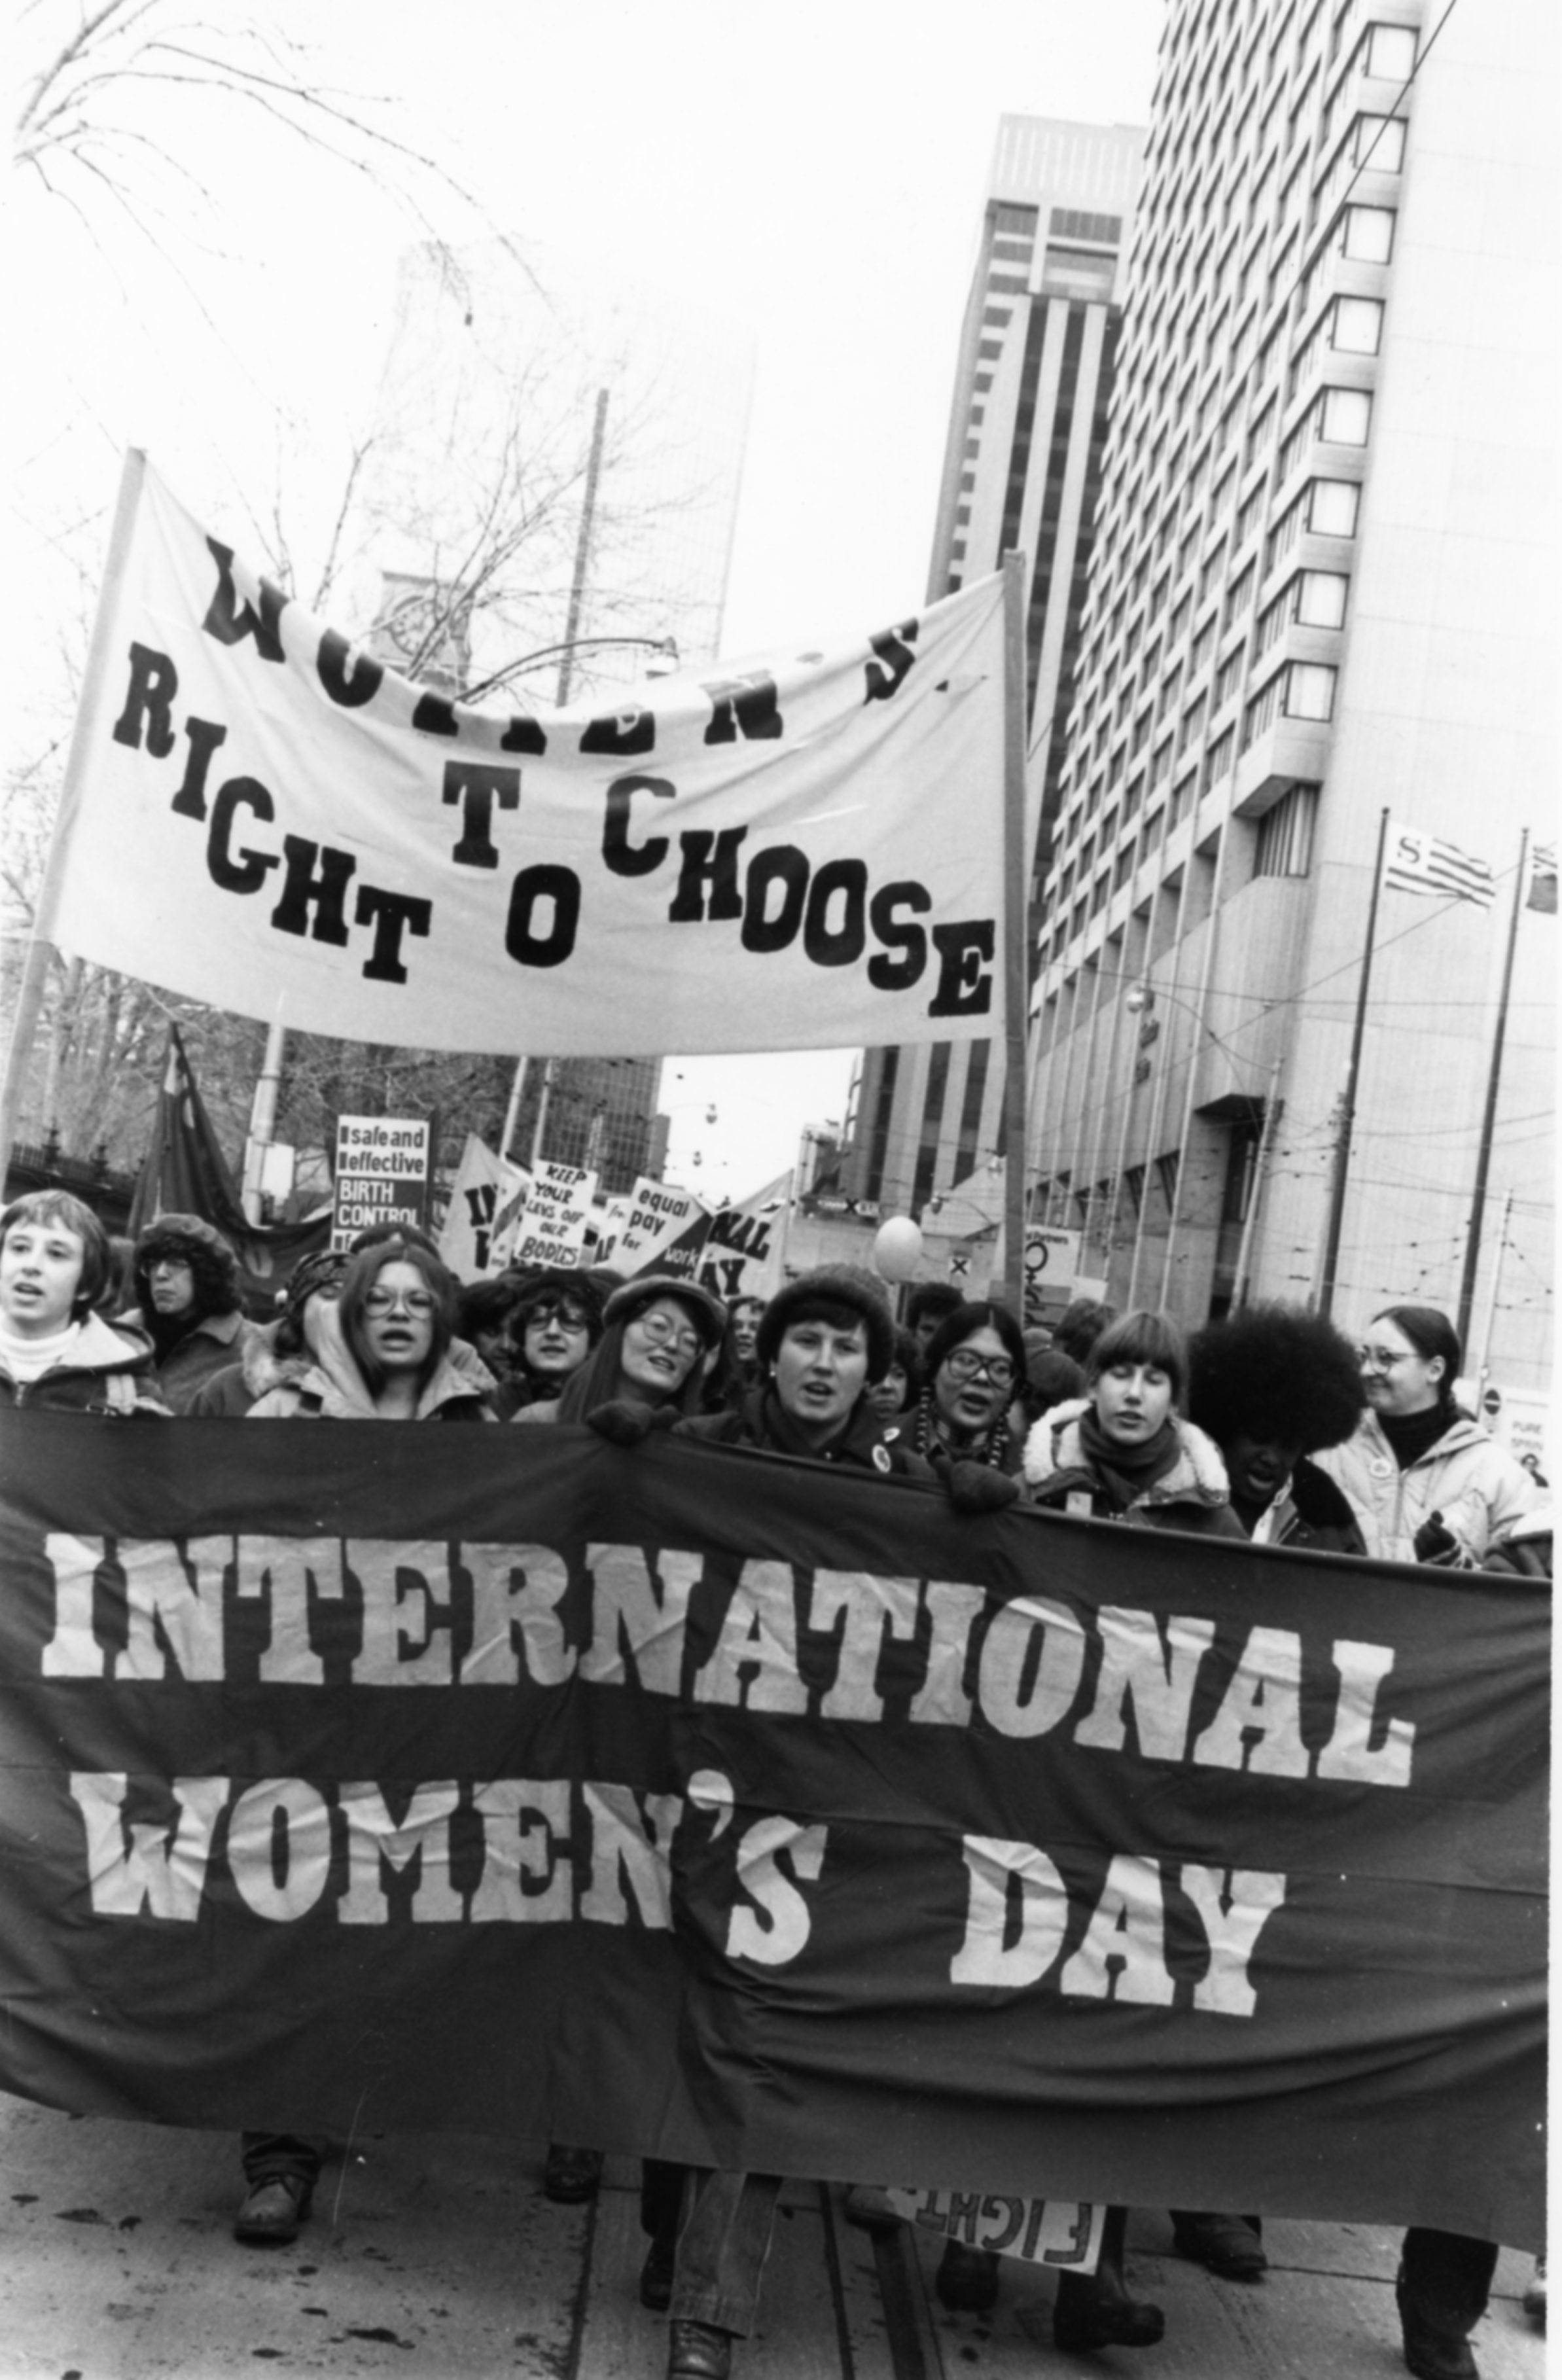 Marching on International Women's Day 1981, CWMA collection 10-001 -S3-I247  © Liz Martin and Nancy Adamson